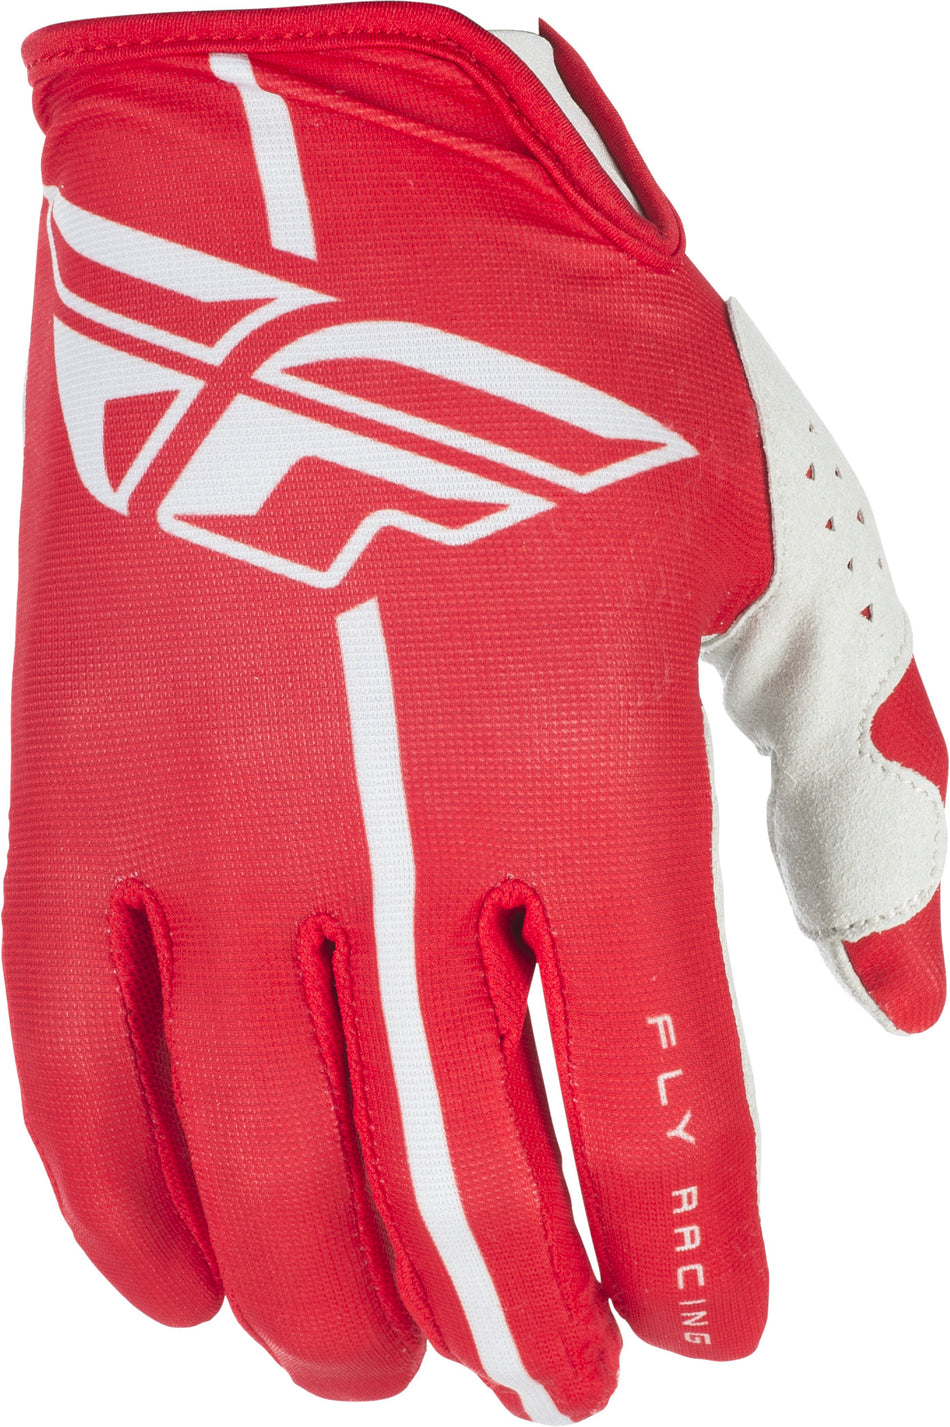 FLY RACING Lite Gloves Red/Grey Sz 5 371-01205